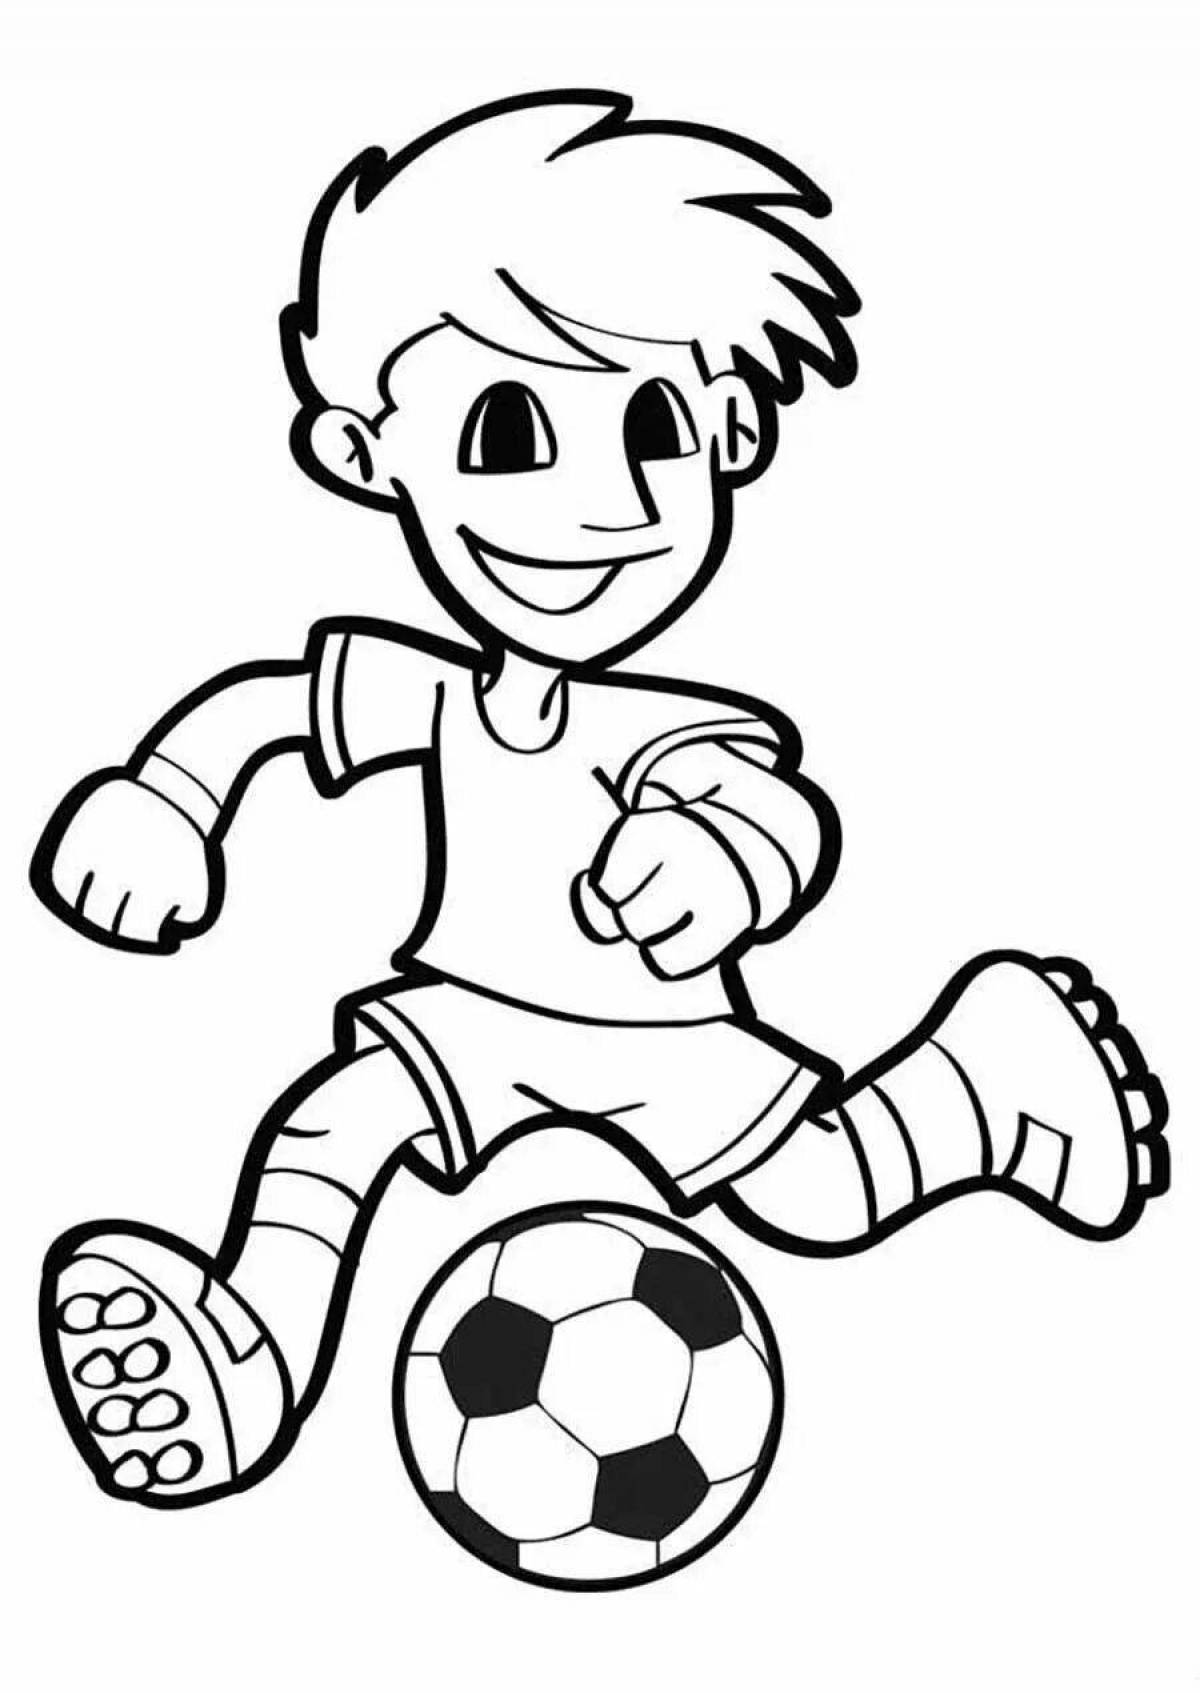 Exciting football coloring book for boys